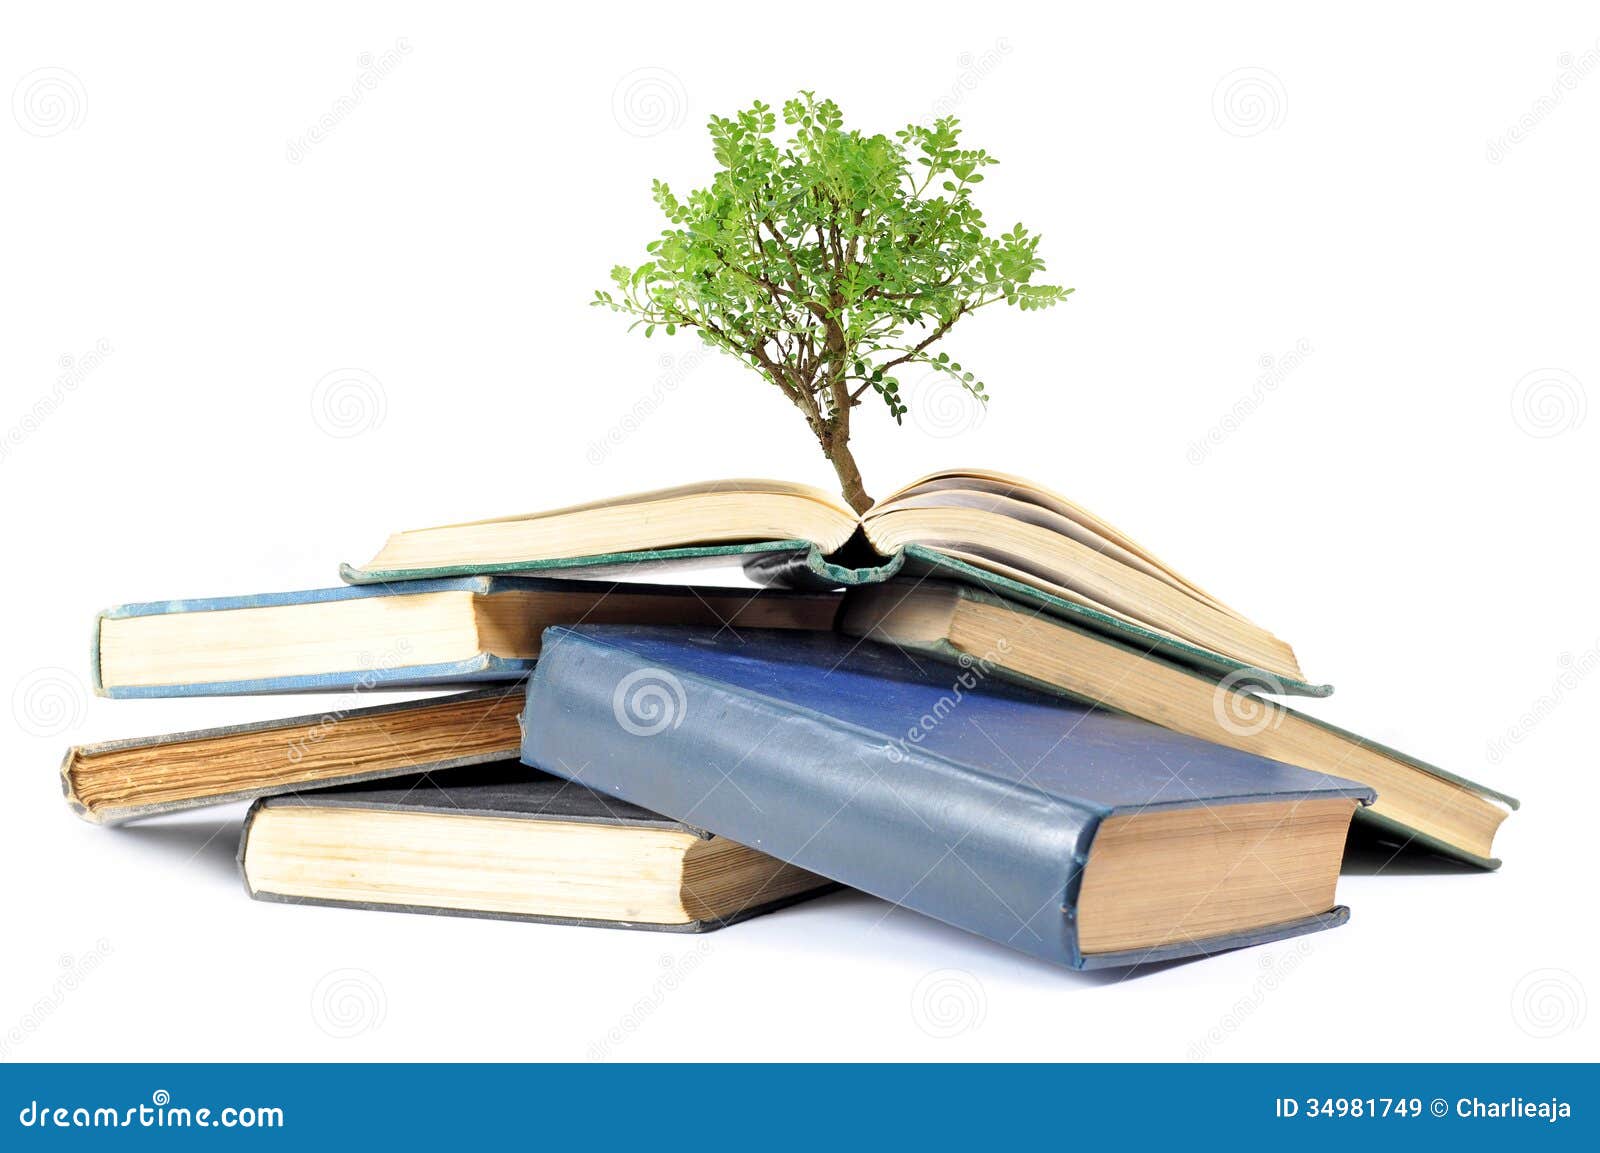 books on business plan